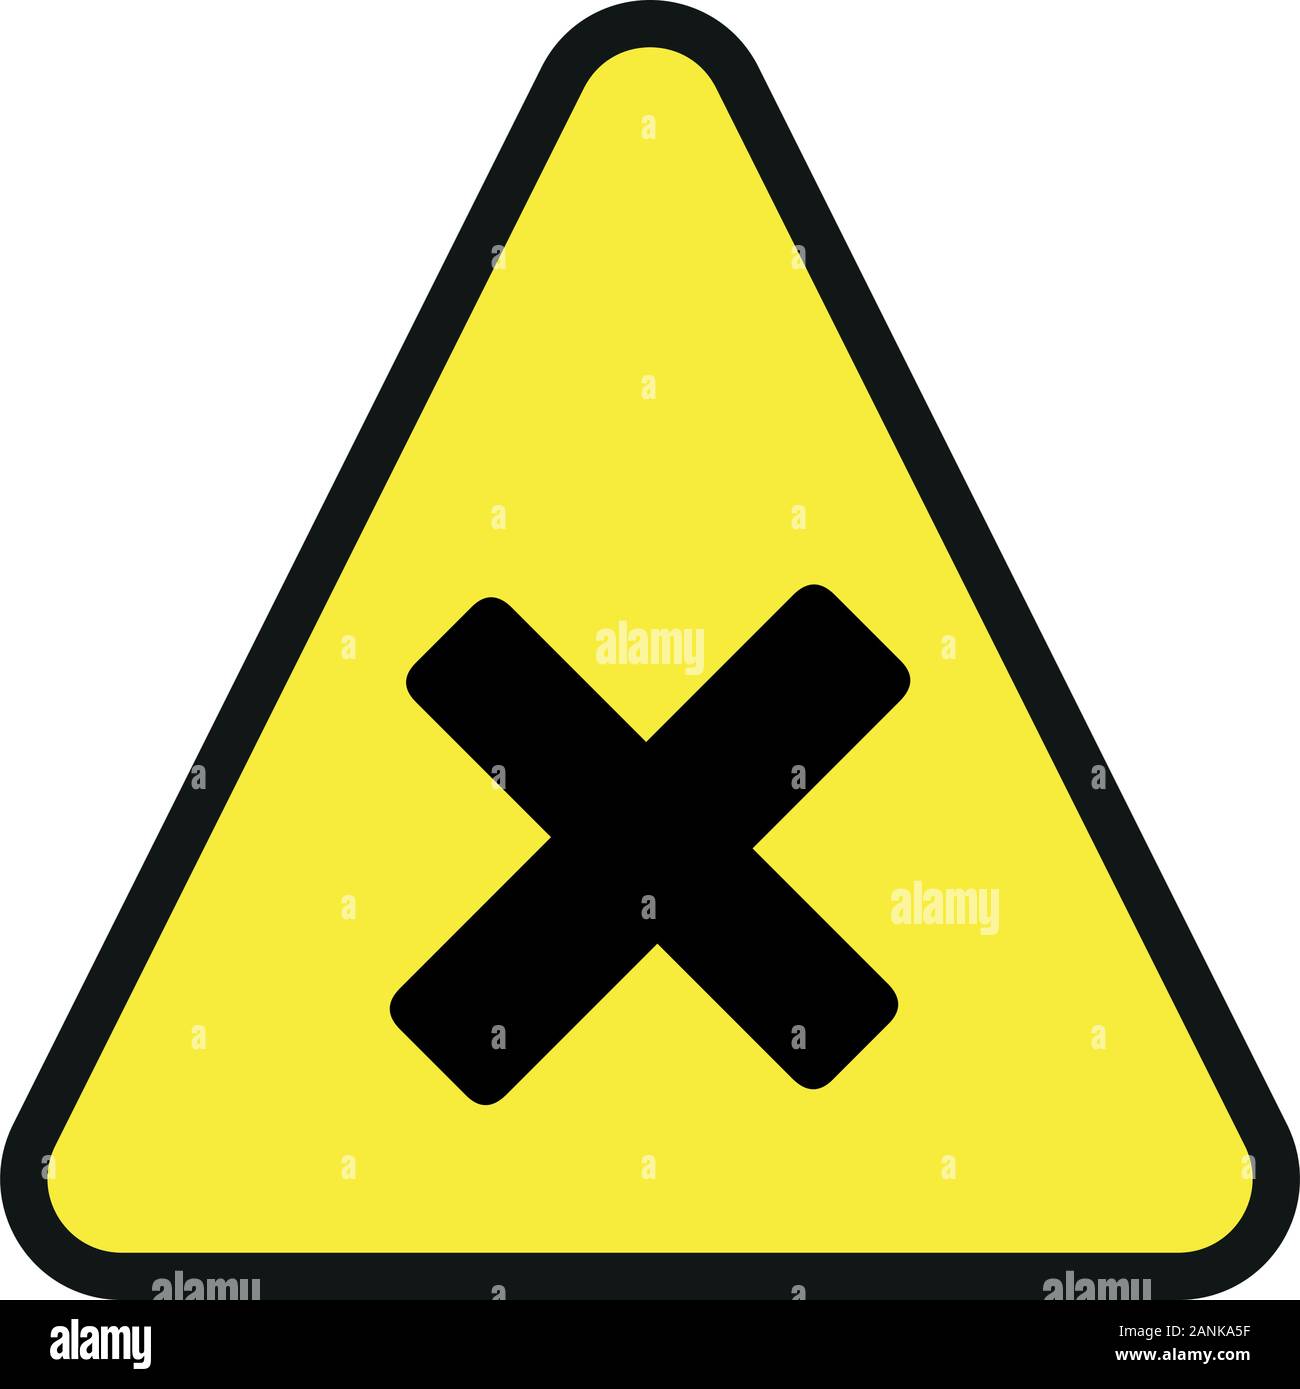 Triangular yellow Warning Hazard Symbol, vector illustration. Harmful yellow sign on a white background. Part of a series. Stock Vector